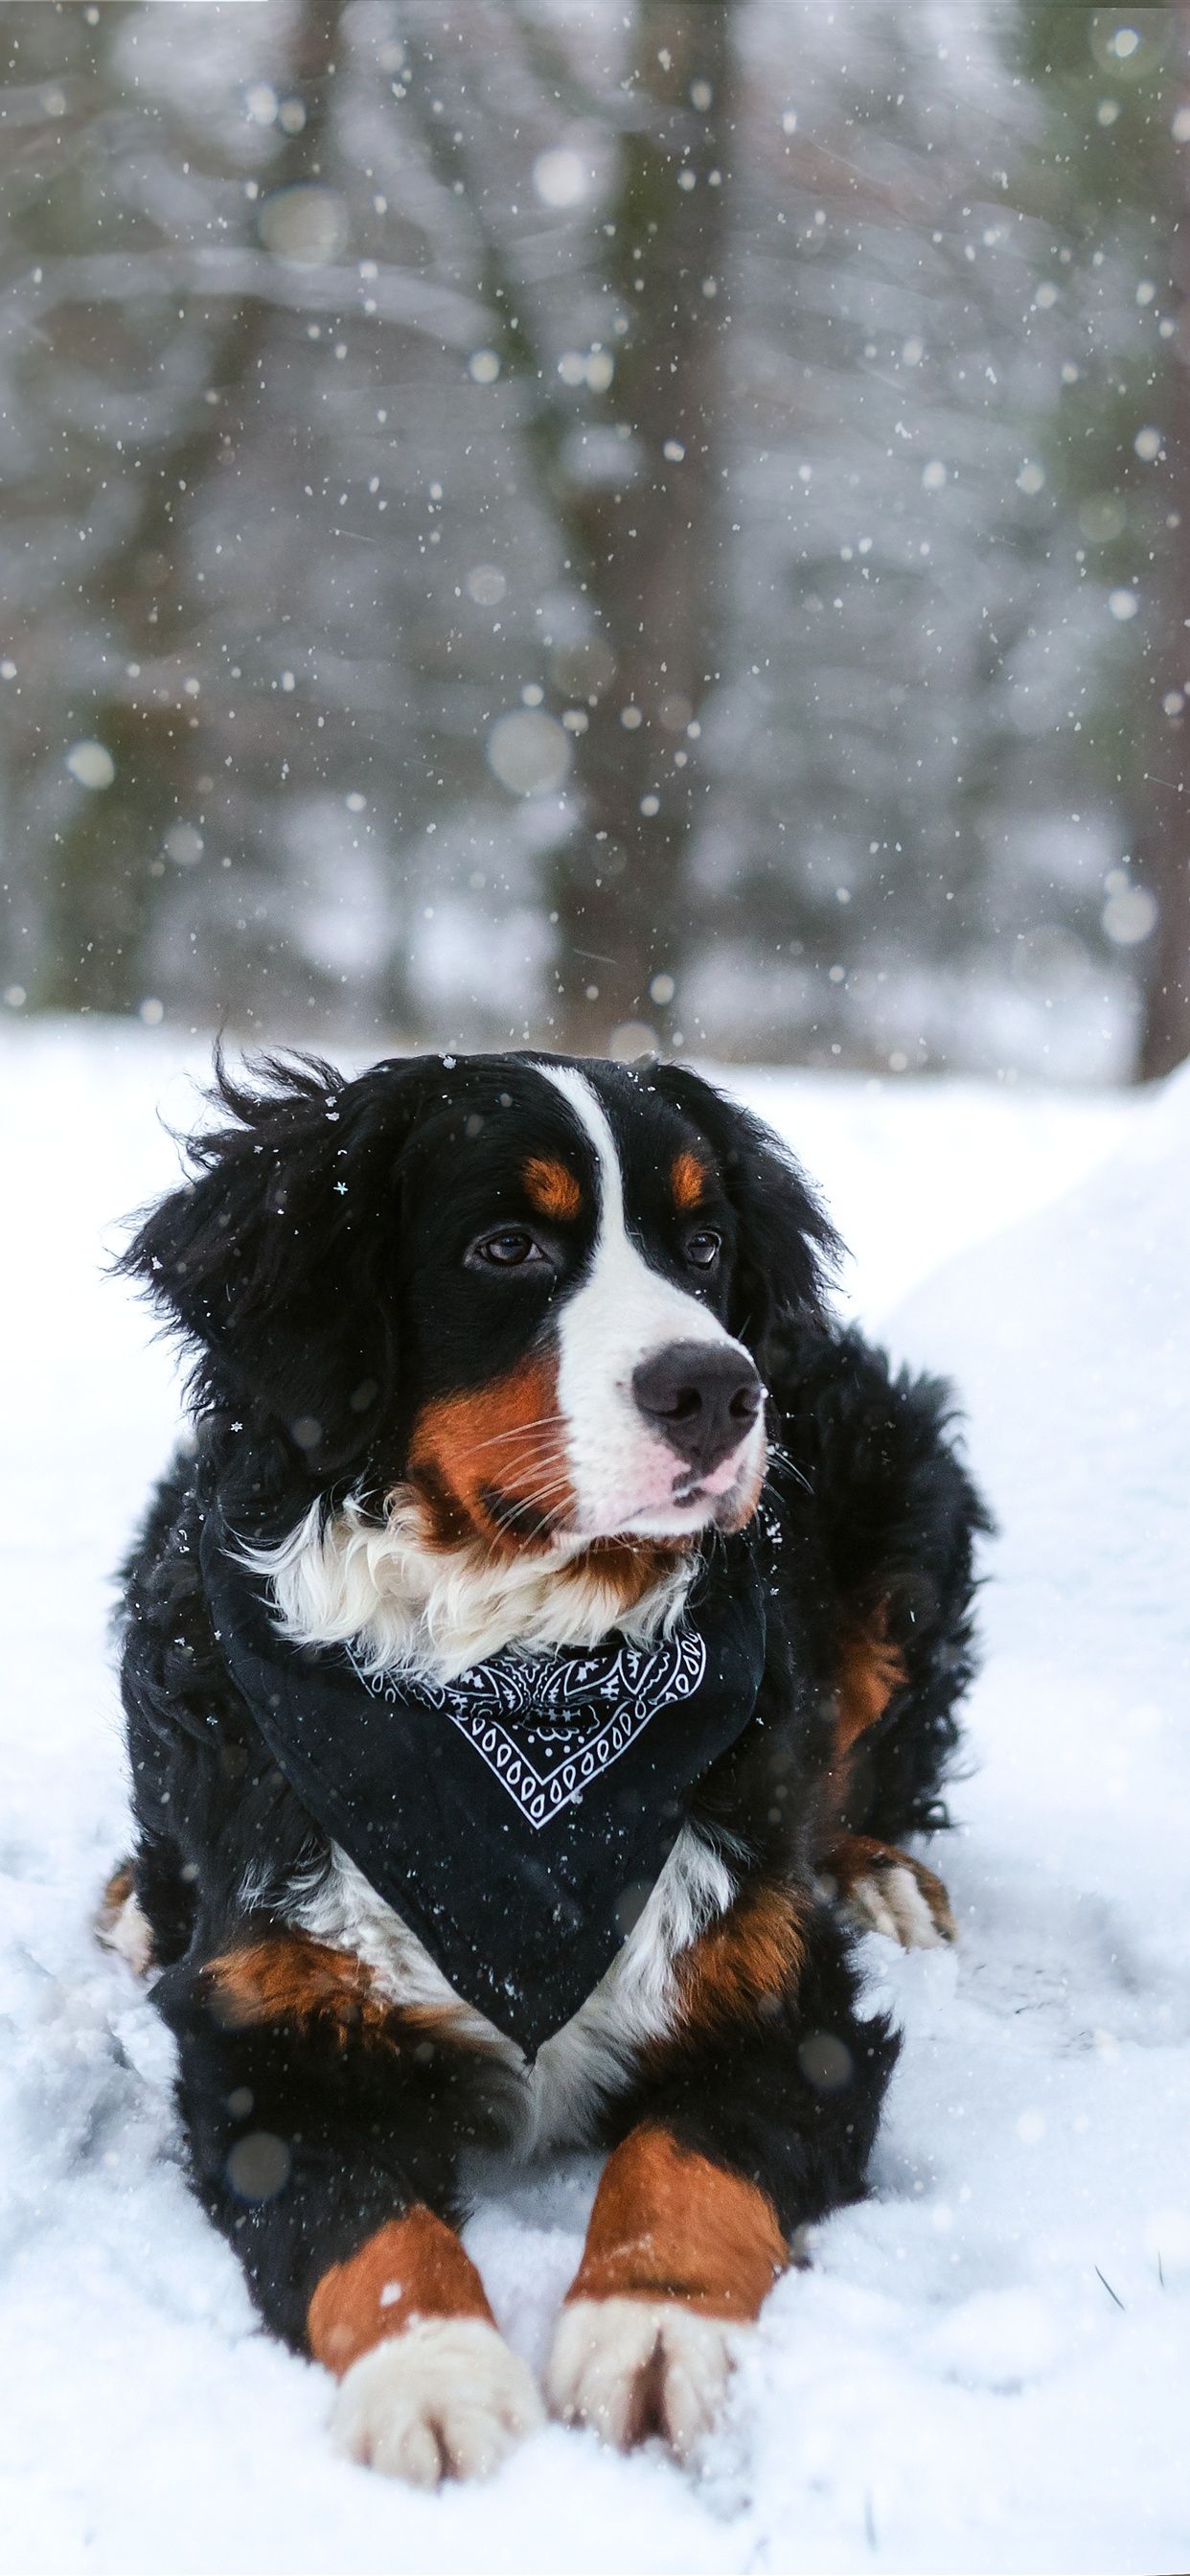 Dog, snow, winter iPhone XS Max, X 3GS wallpaper download